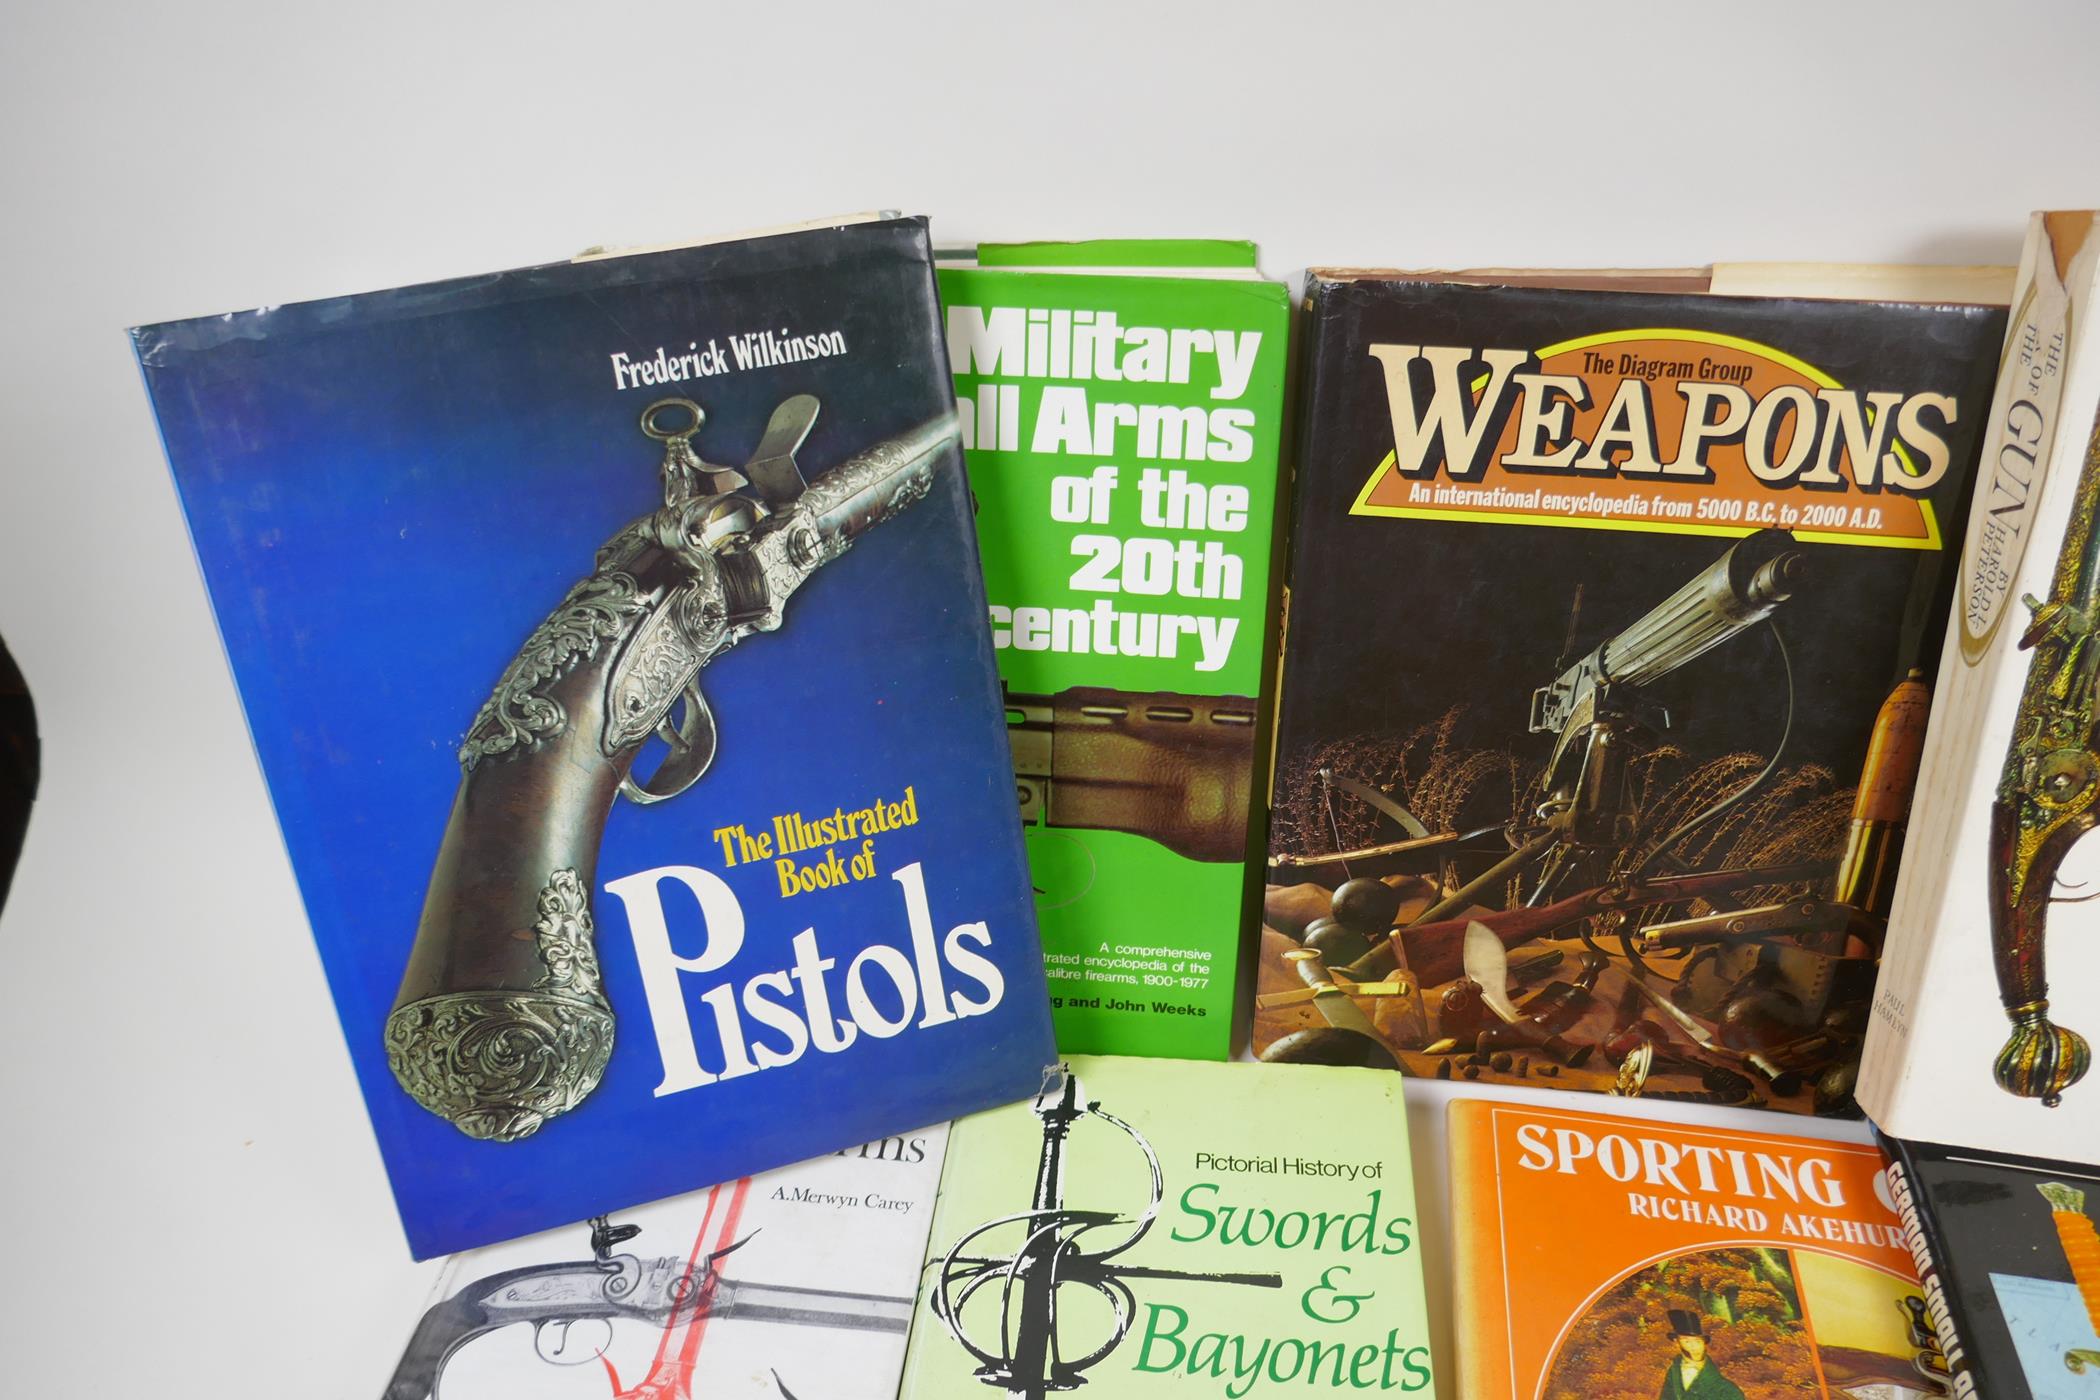 A collection of books on arms and amour militaria - Image 4 of 6